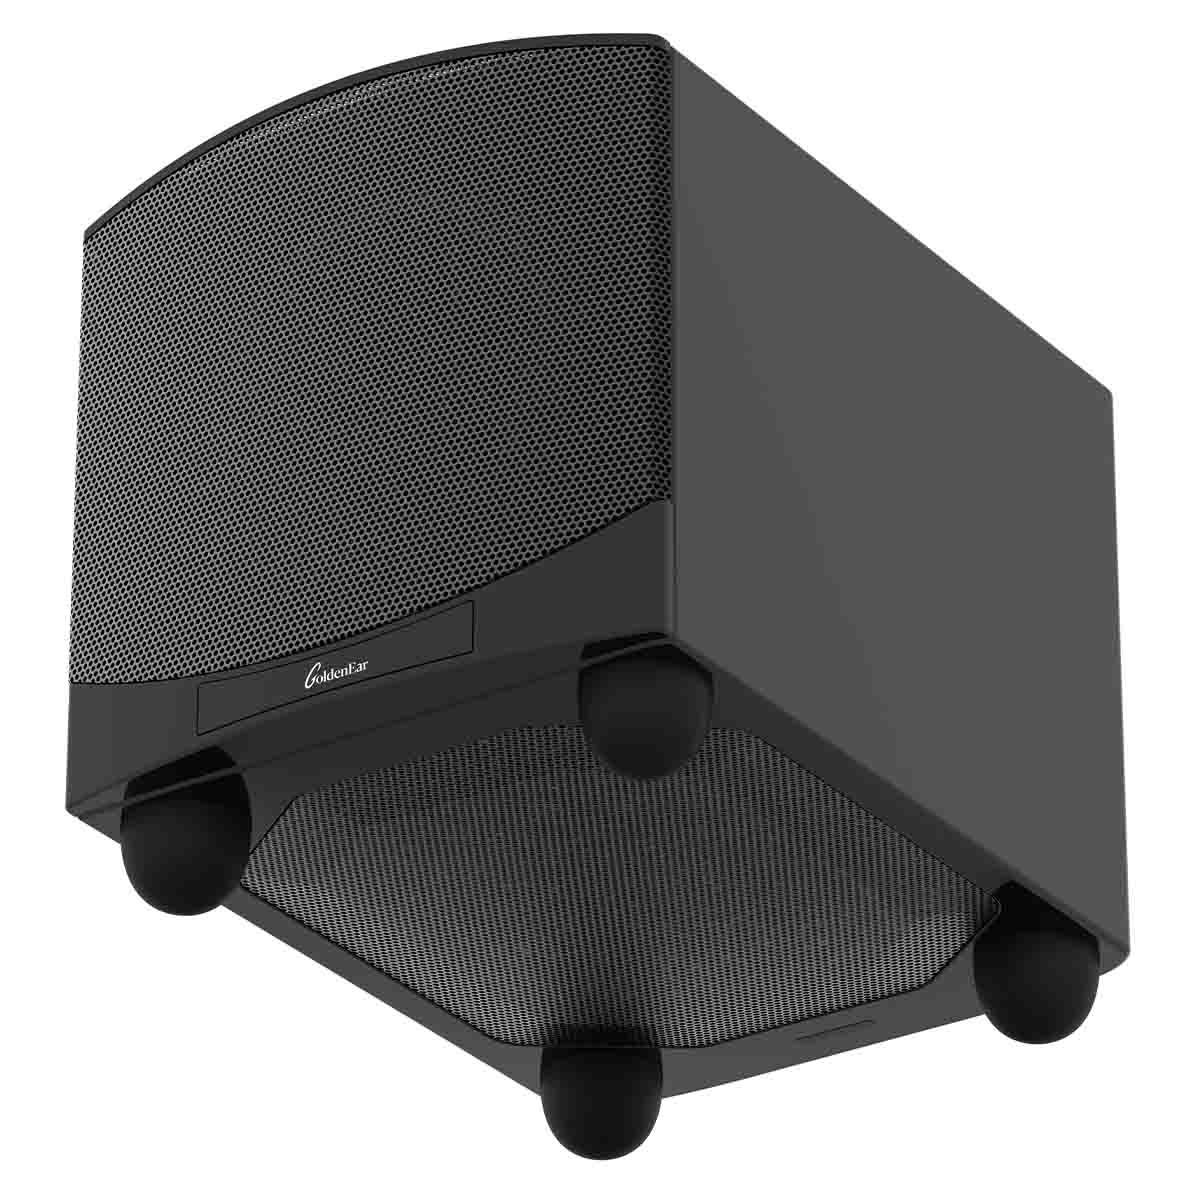 GoldenEar ForceField 40 - 10” Compact Subwoofer - Black - angled bottom view